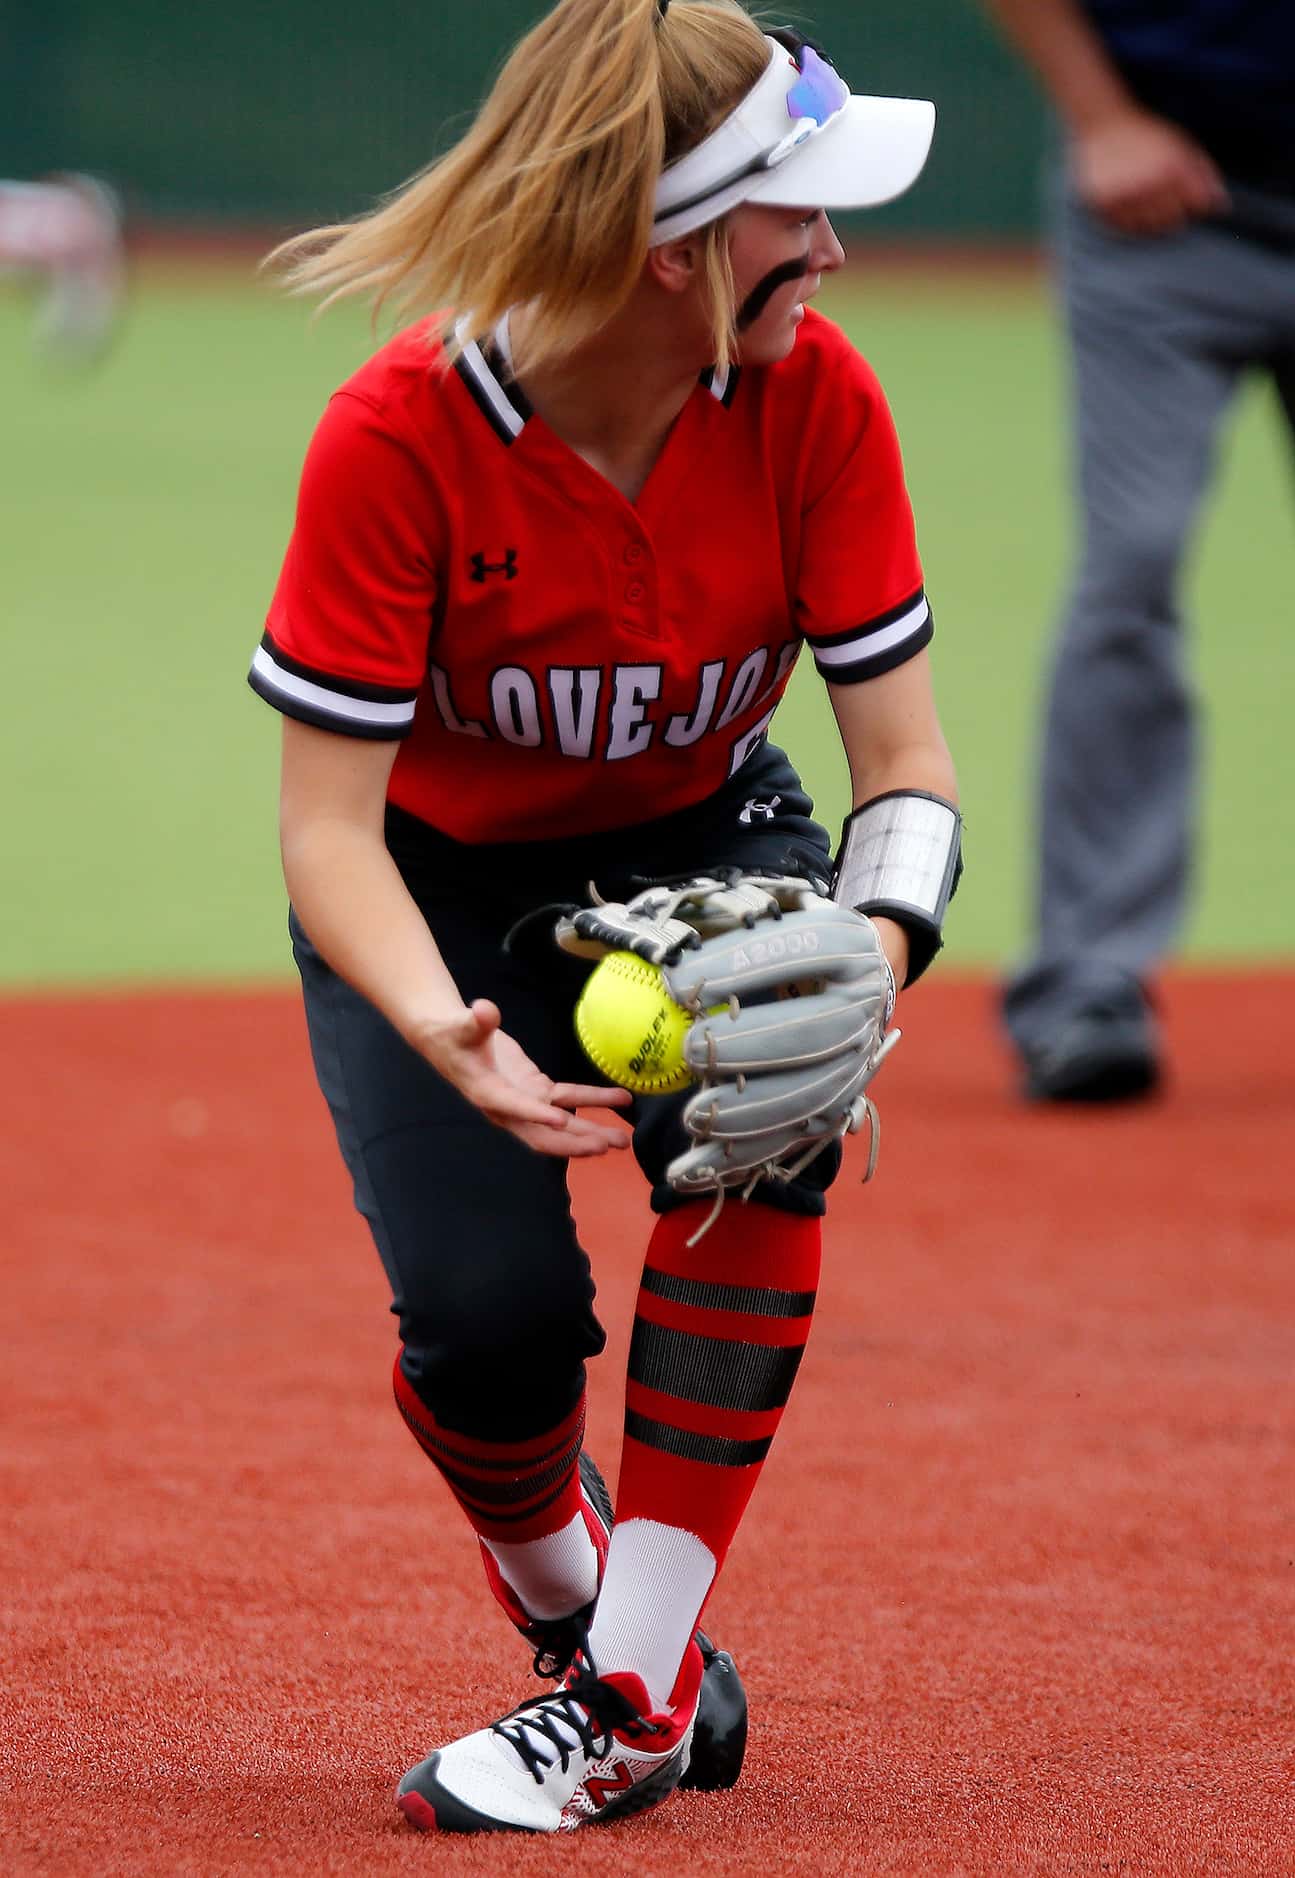 Lovejoy shortstop Skylar Rucker (5) makes the stop before making an underhand toss to second...